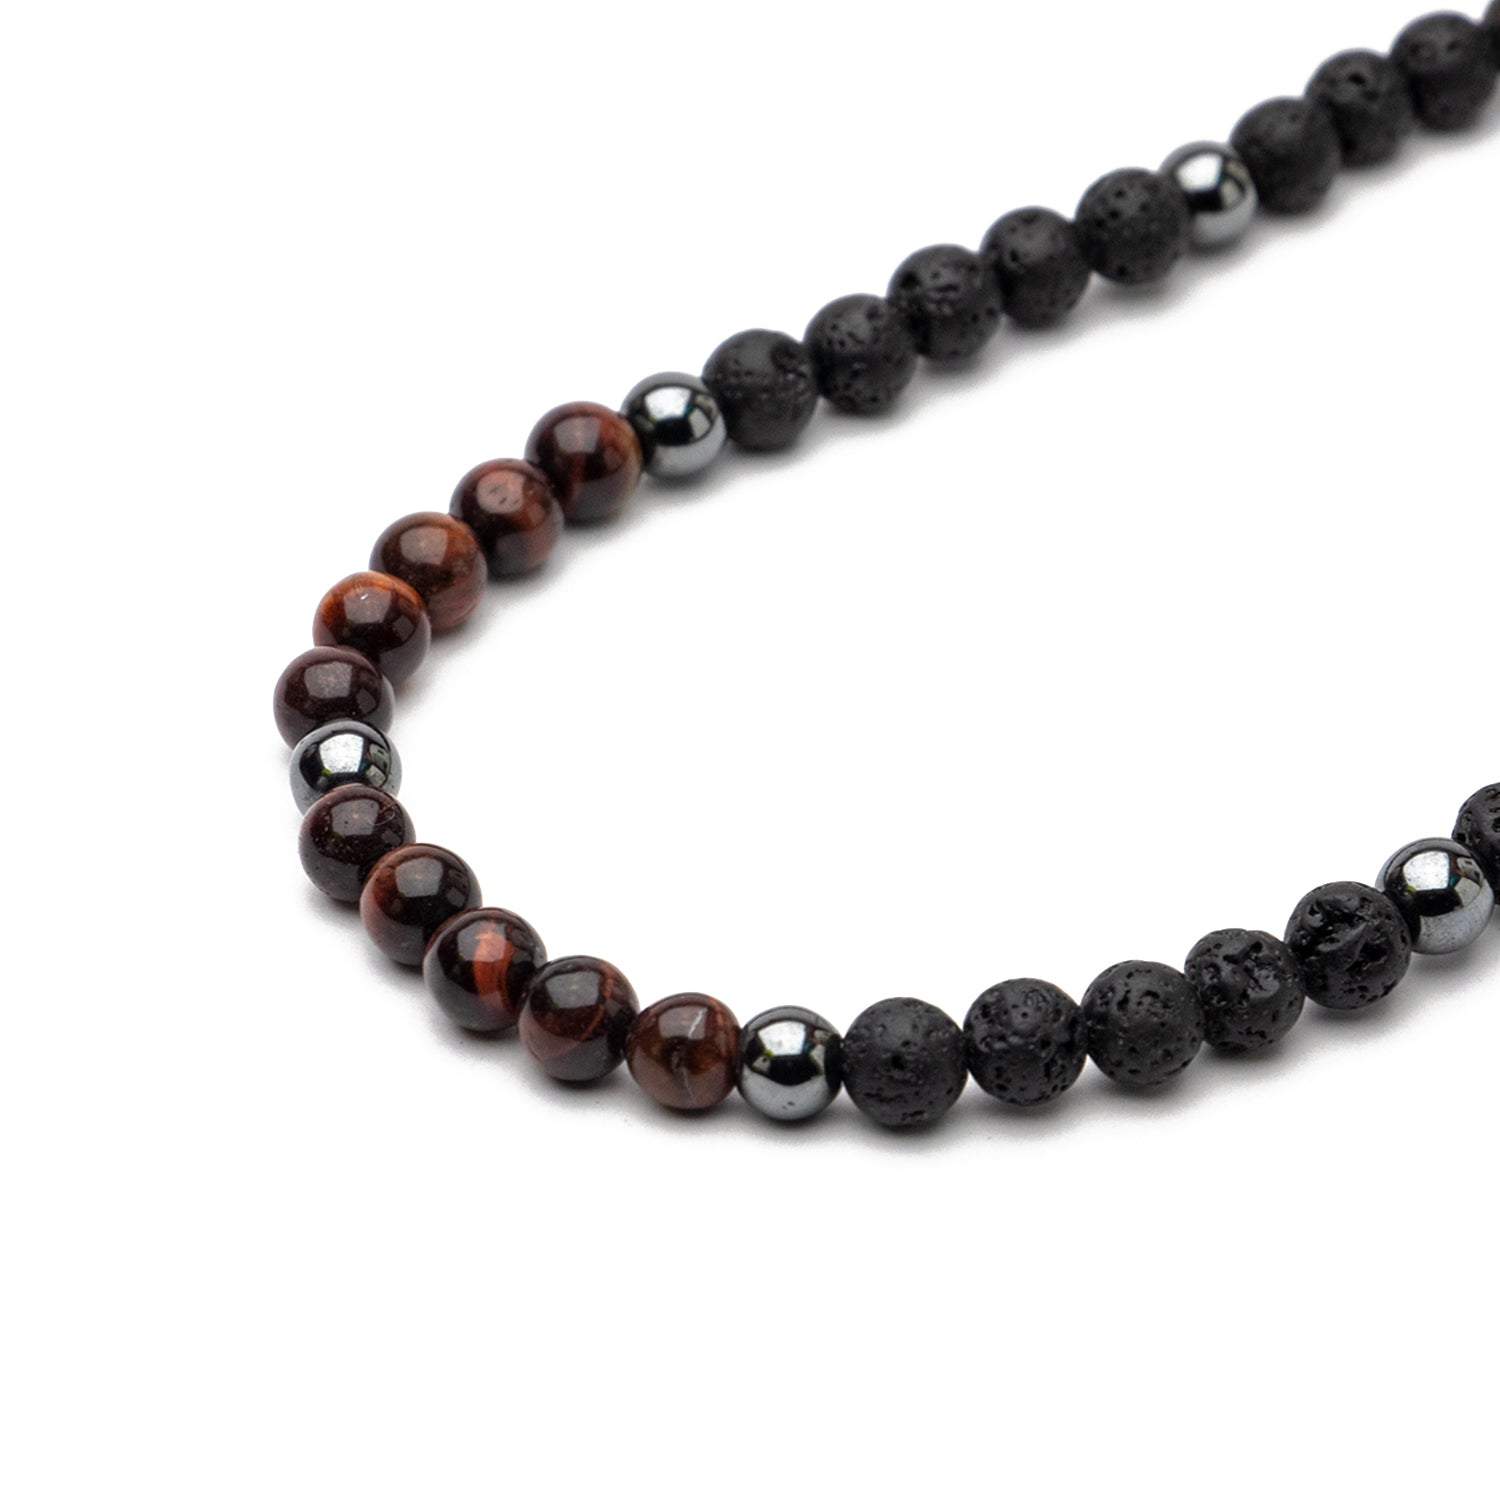 Boho Link beaded chain with Red Tiger eye and Lava Gemstones